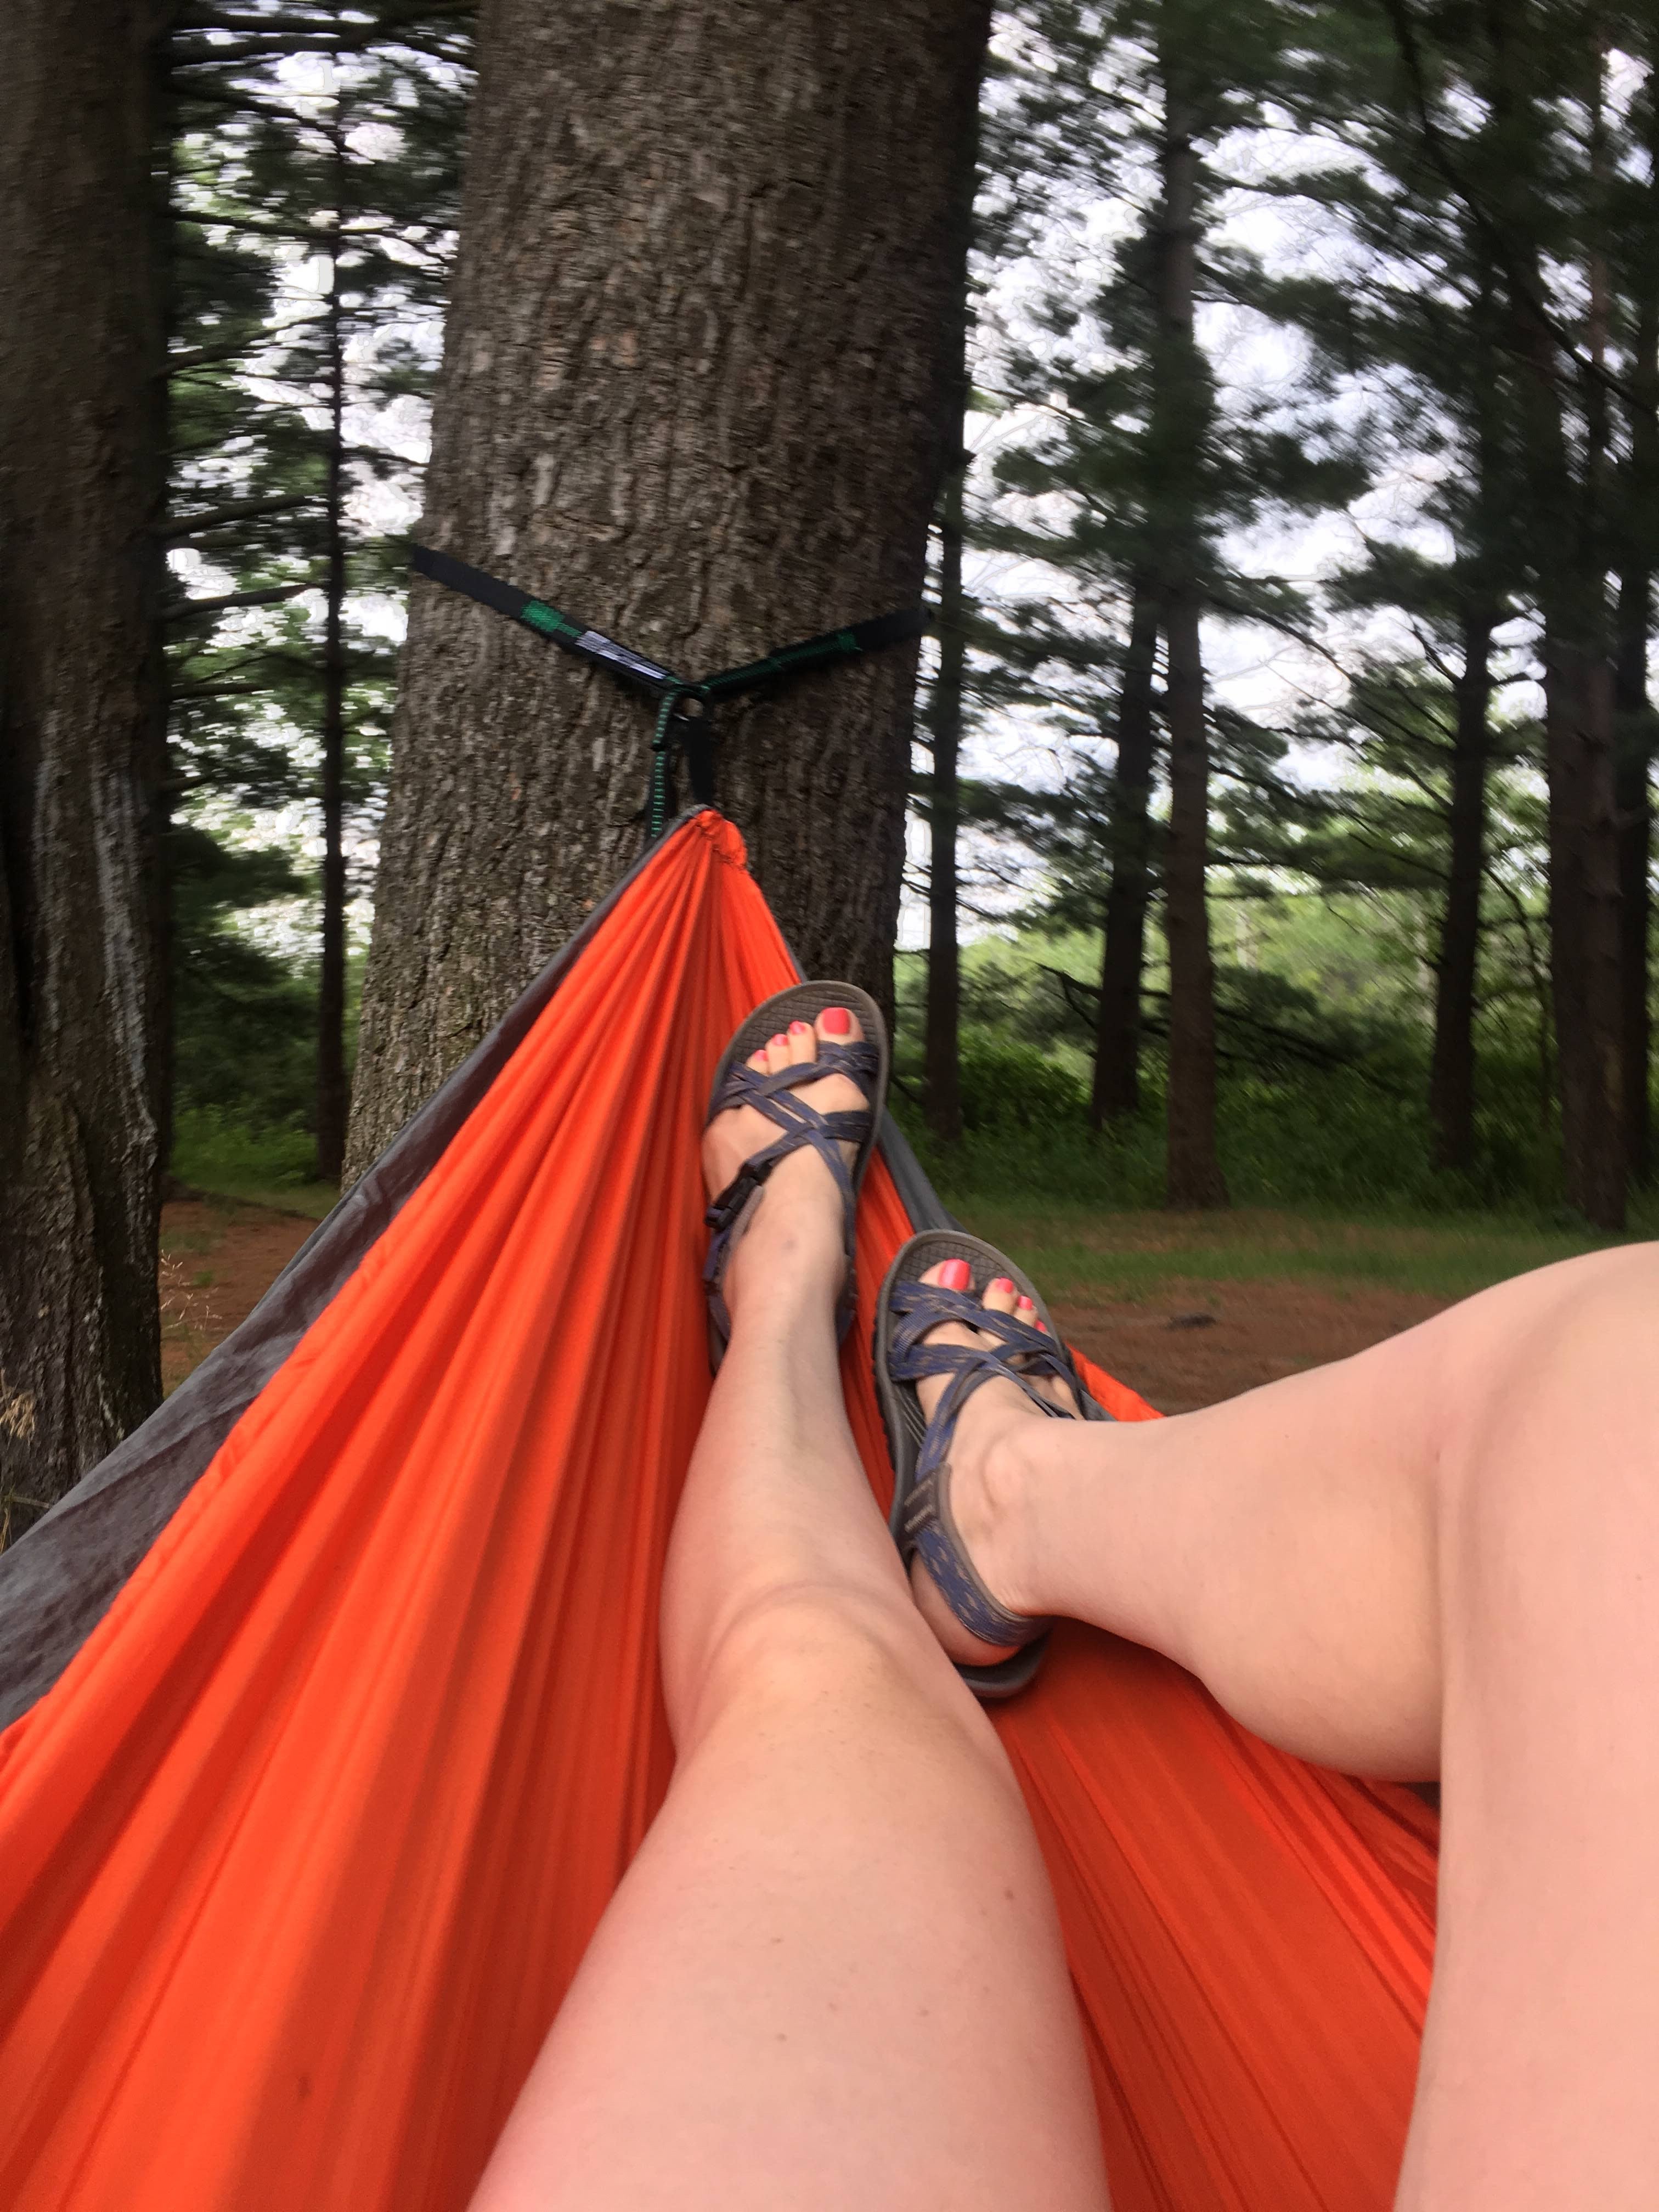 This is my favorite site, so many trees for great hammock hanging!